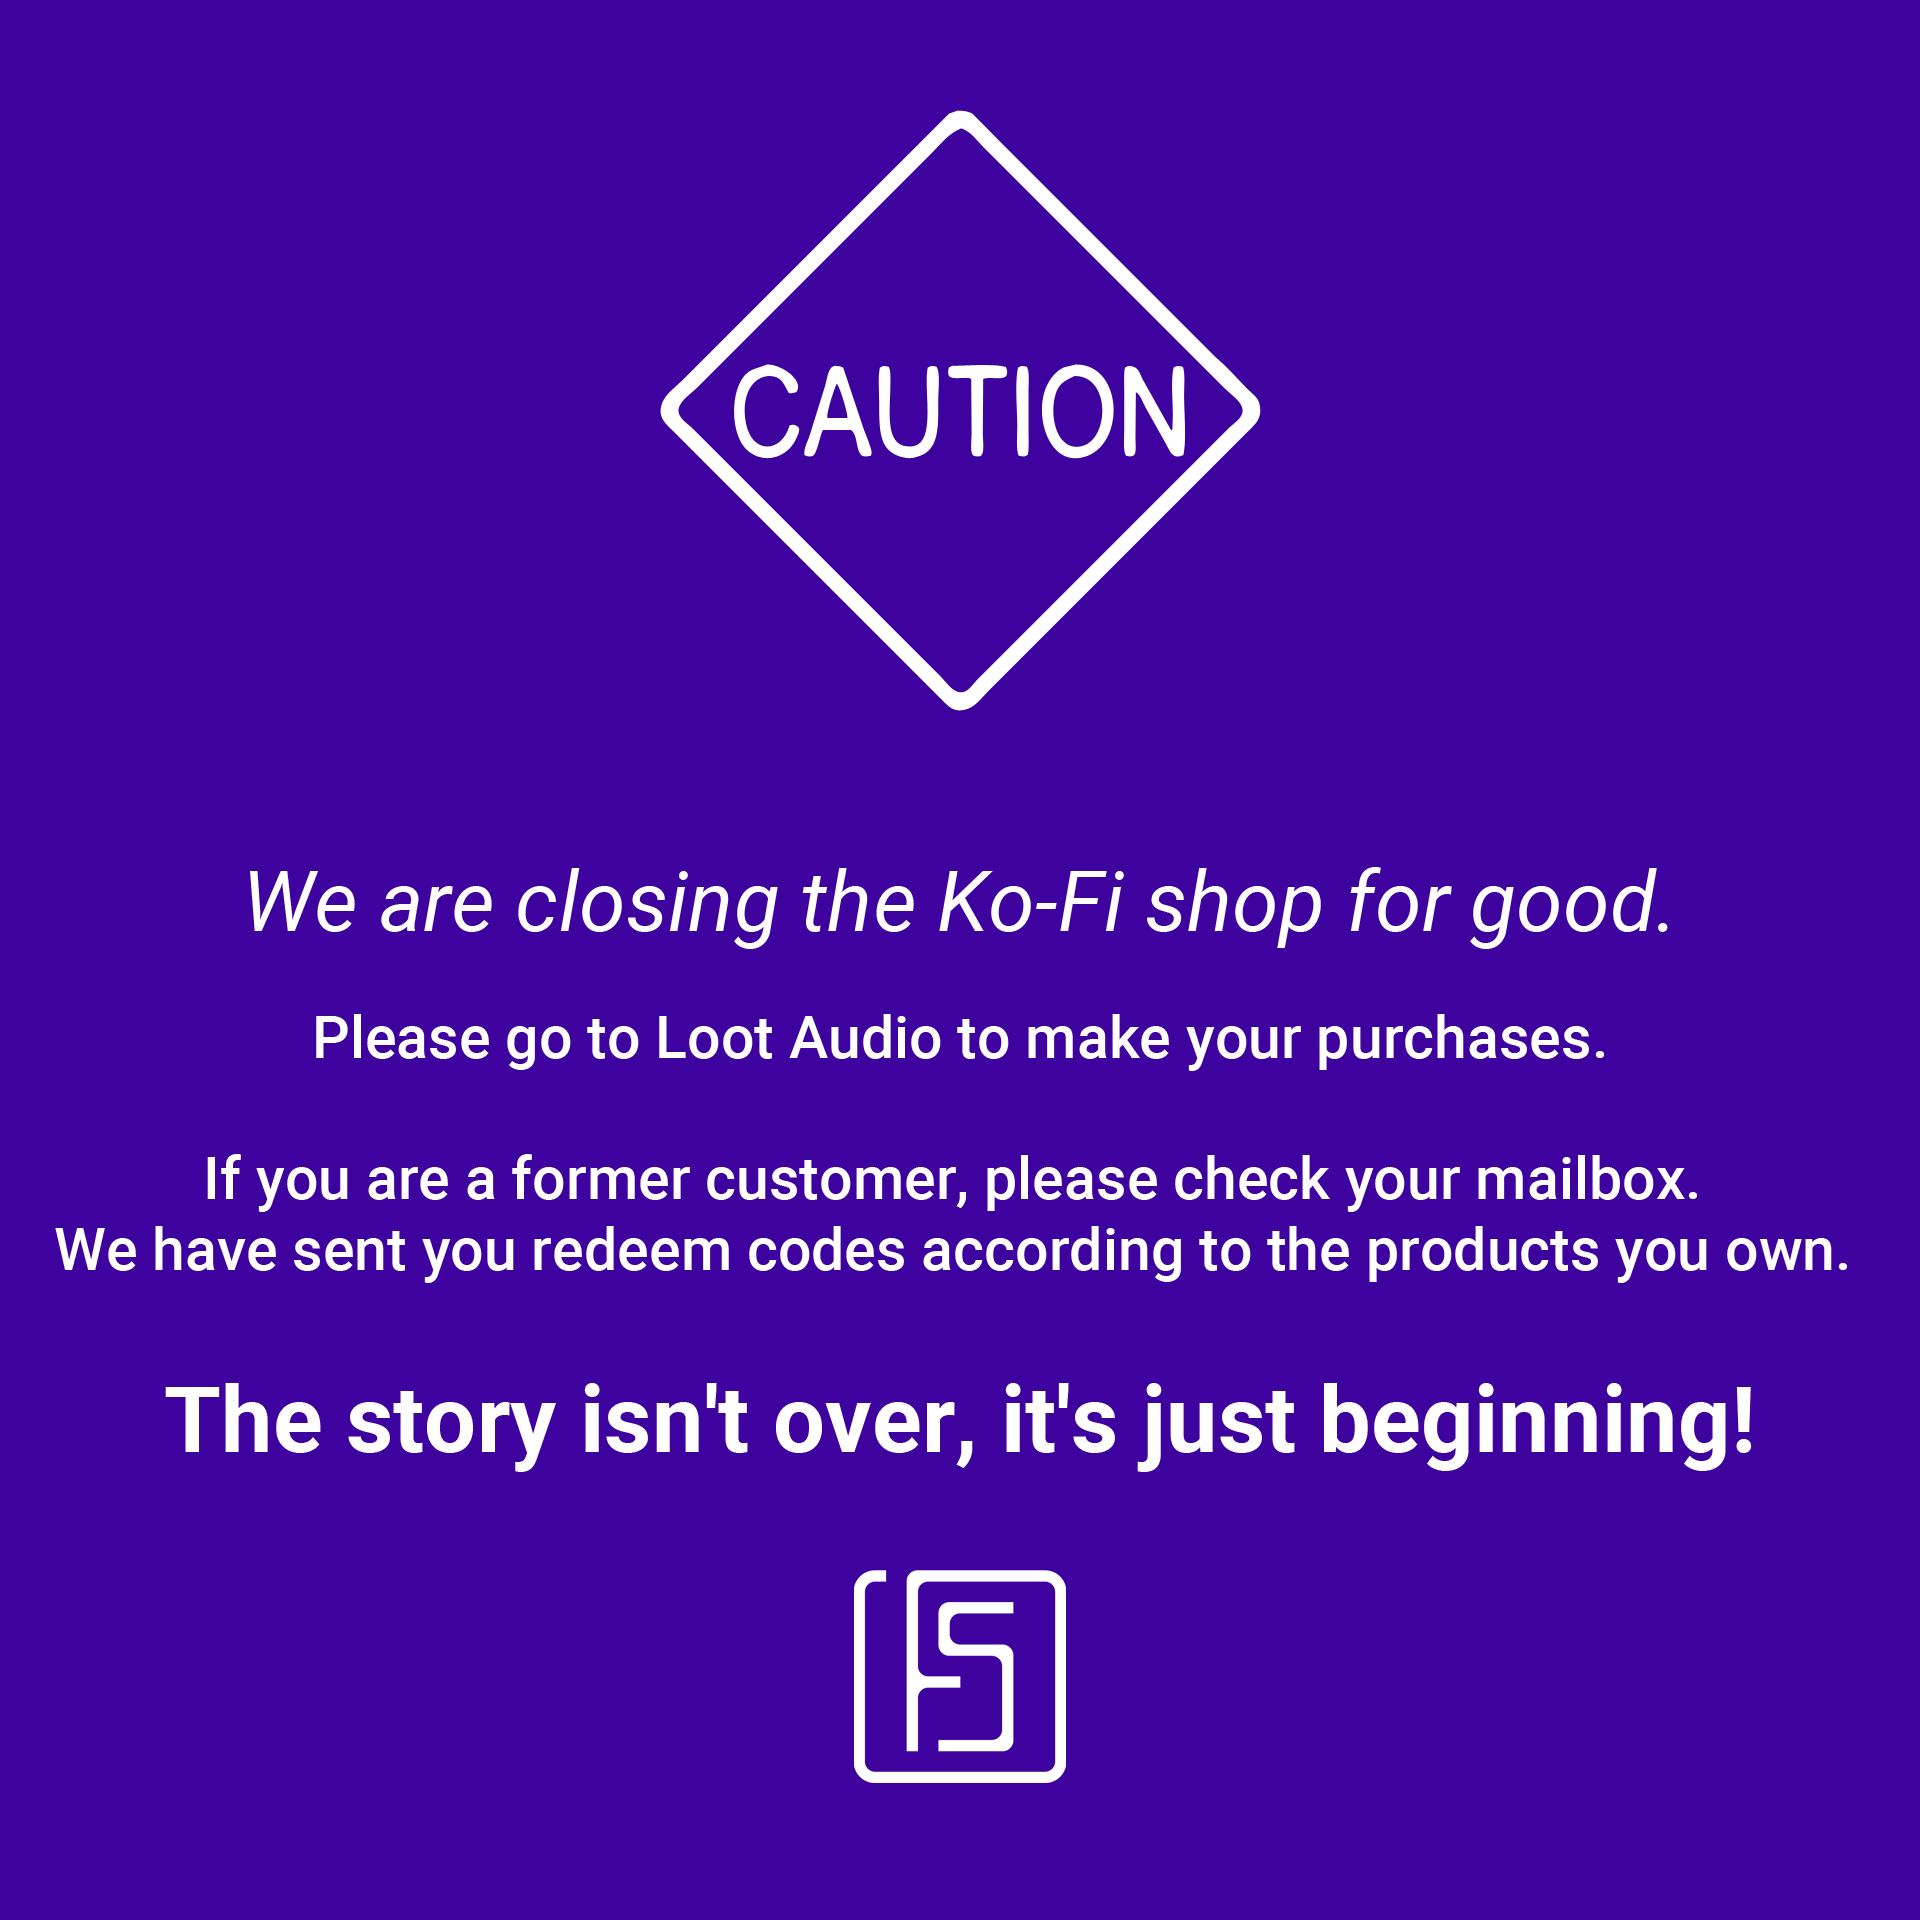 We are closing the Ko-Fi shop for good.